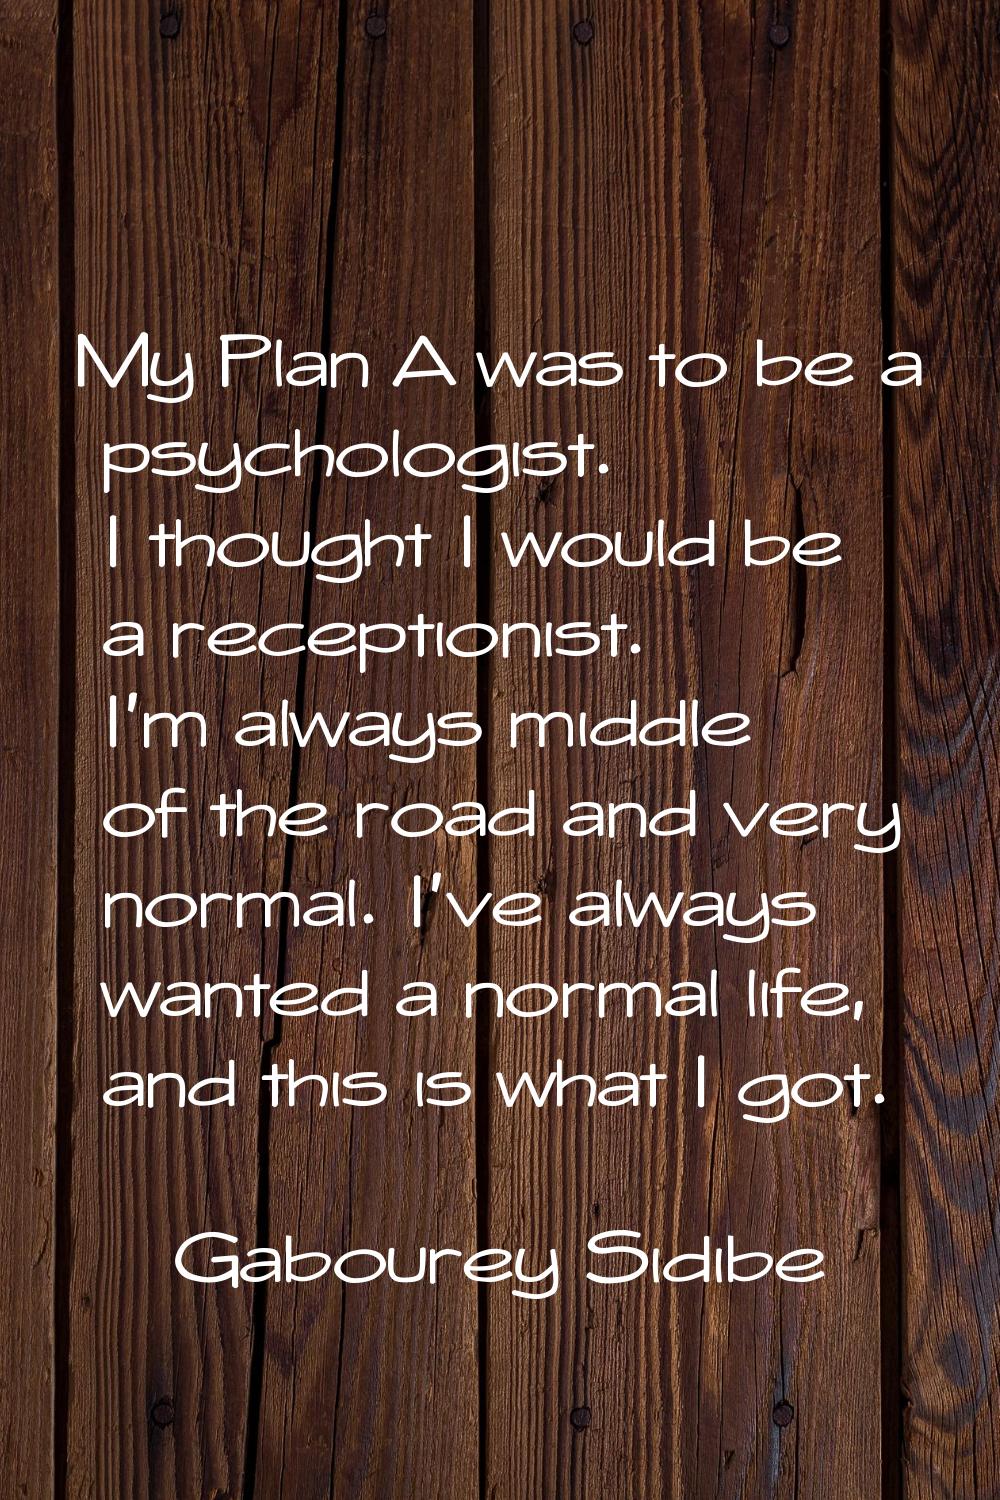 My Plan A was to be a psychologist. I thought I would be a receptionist. I'm always middle of the r